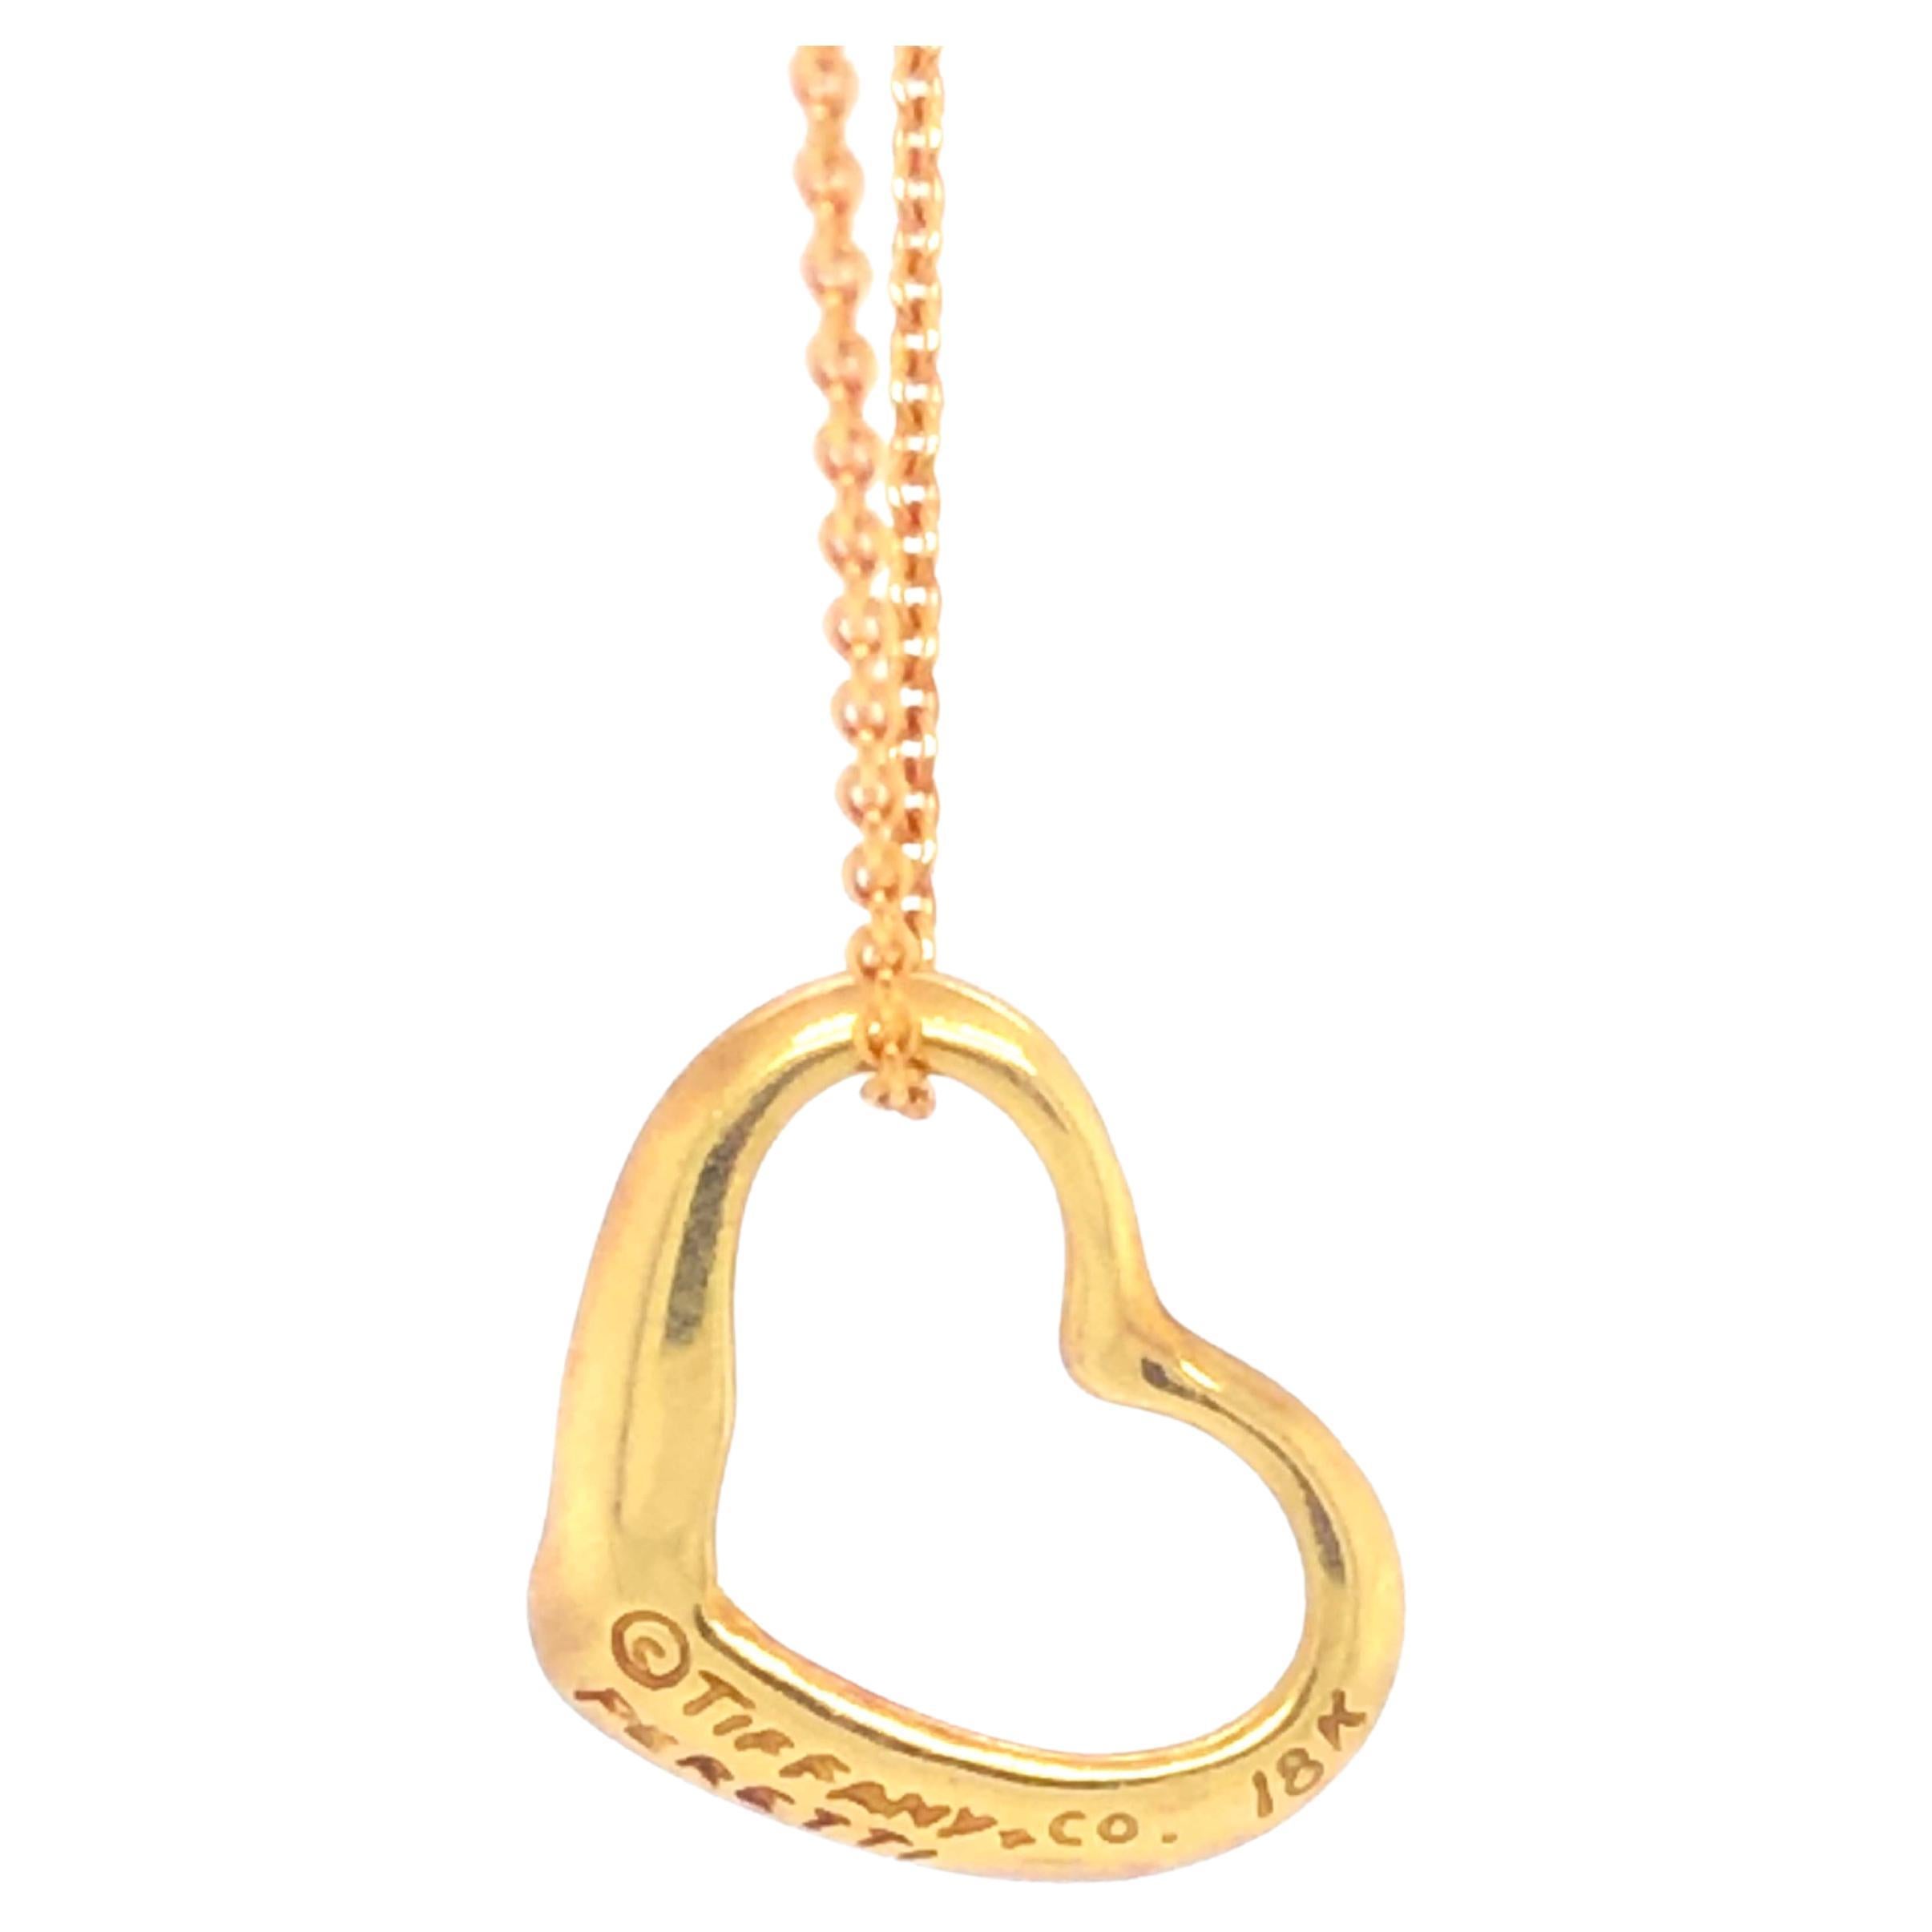 Elsa Peretti for Tiffany & Co. Jewelry: Necklaces, Rings & More 